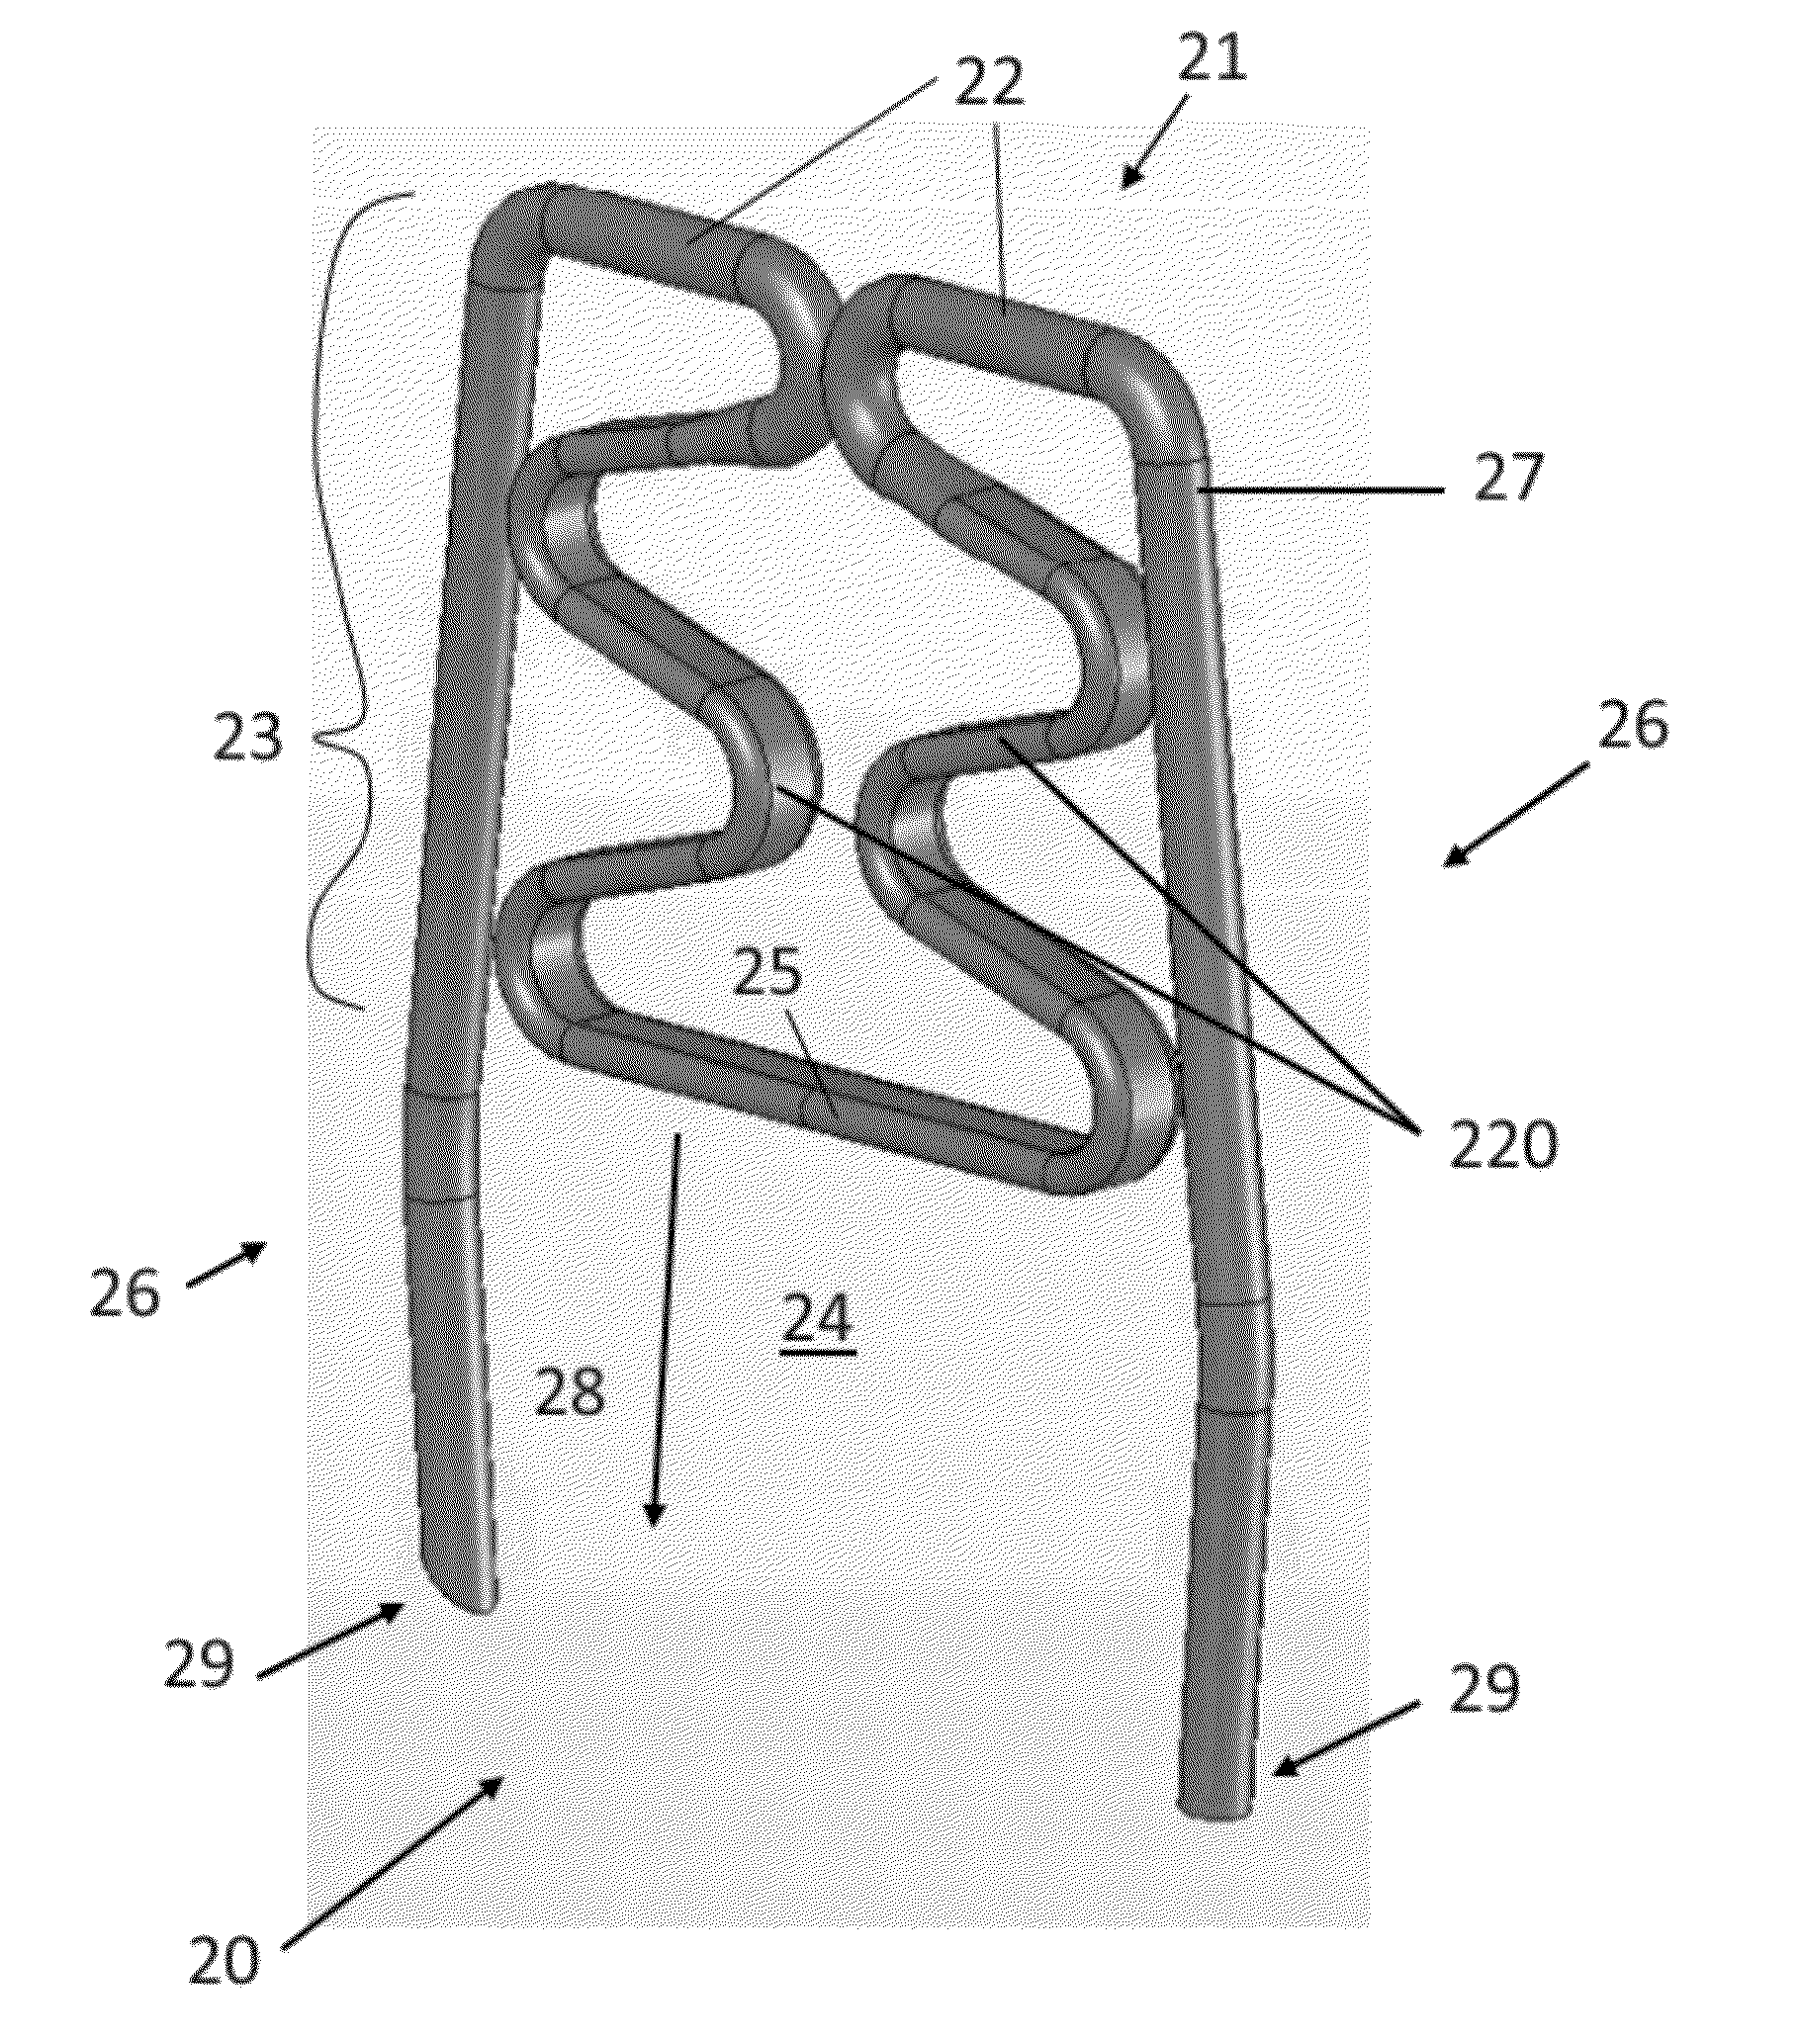 Adjustable Compression Staple and Method for Stapling with Adjustable Compression